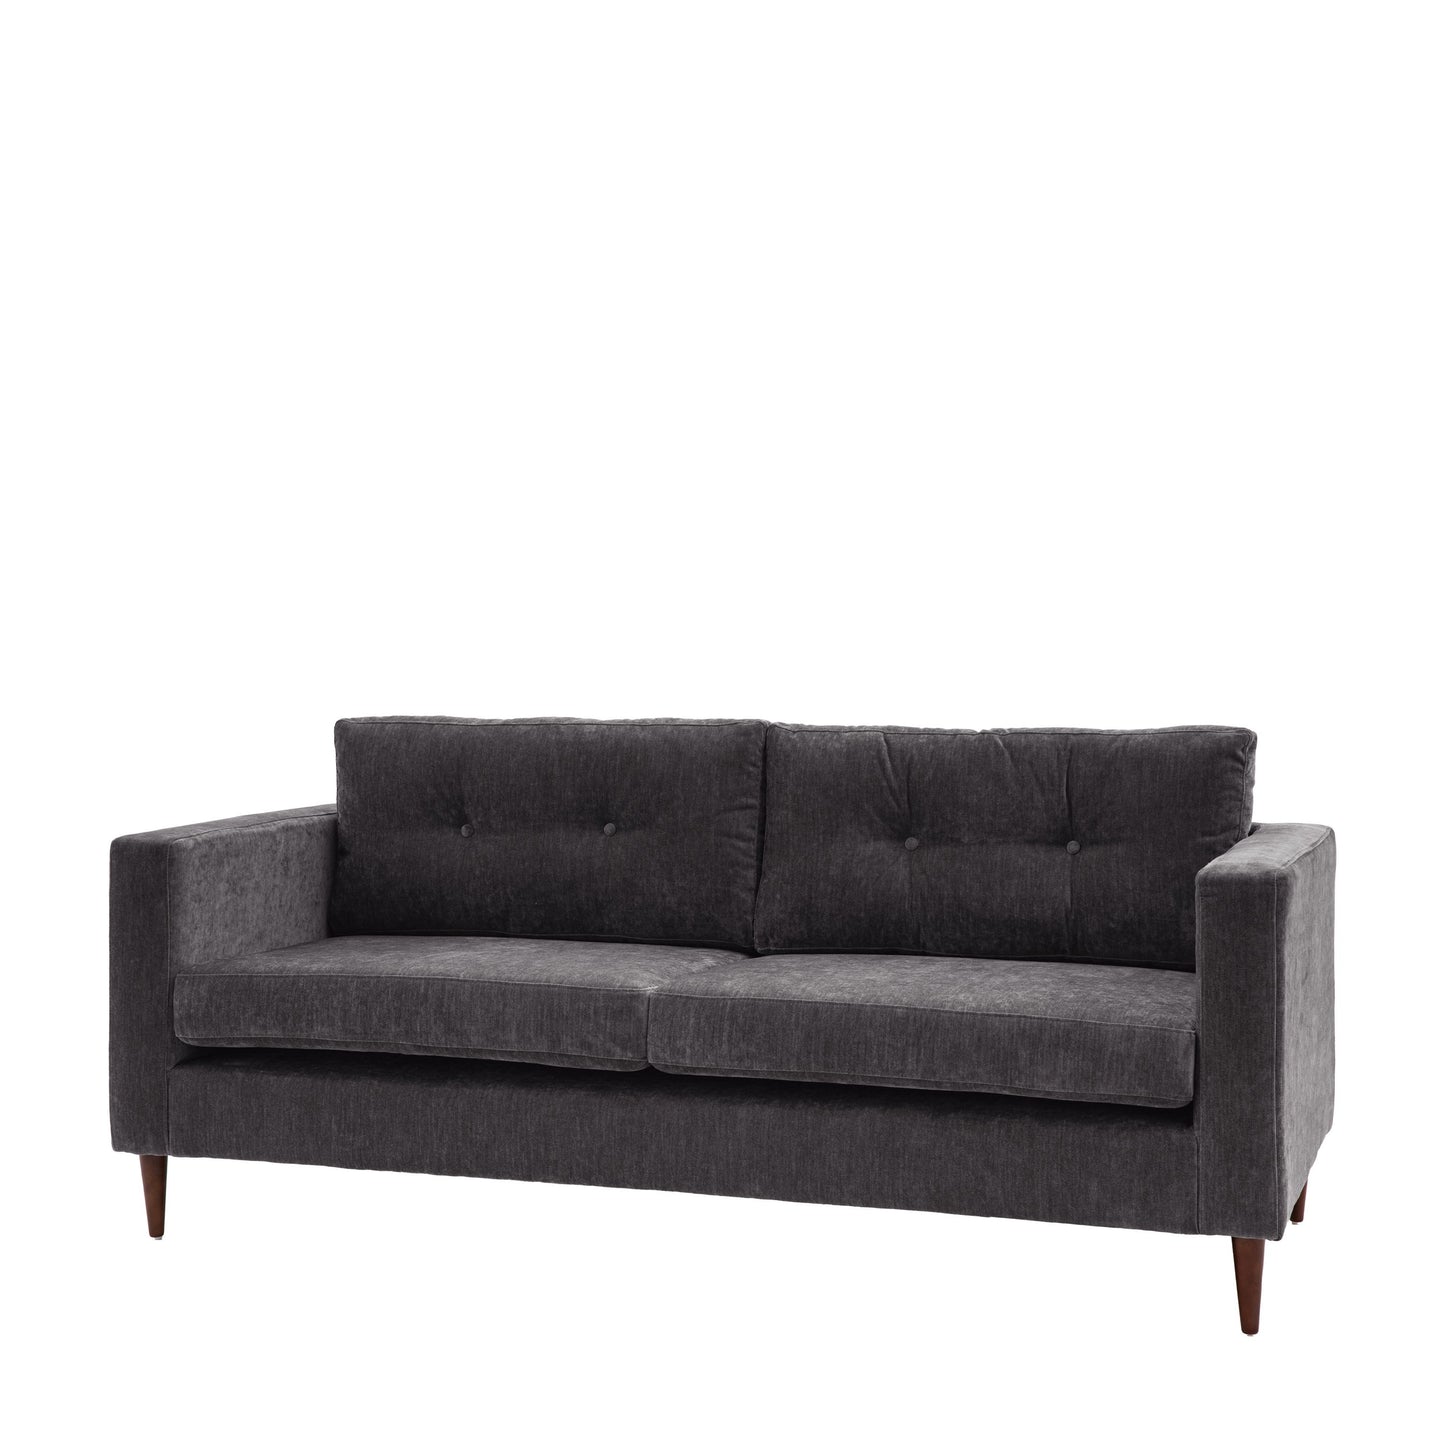 Harlow 3 Seater Sofa in Charcoal